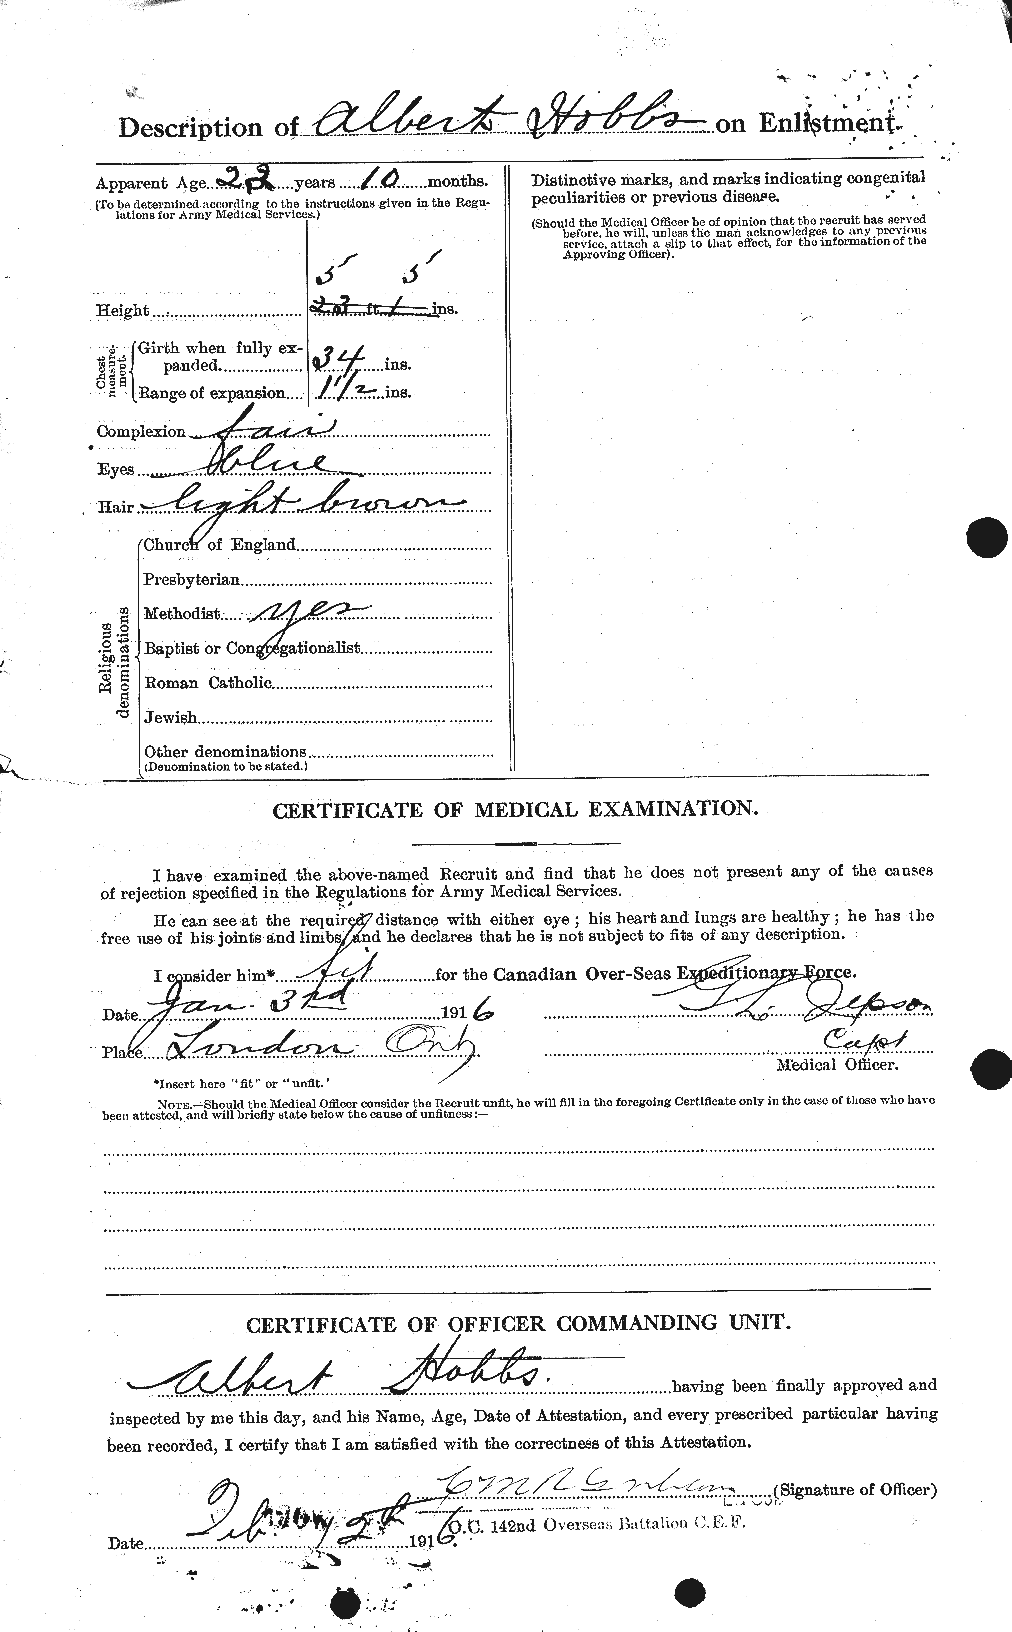 Personnel Records of the First World War - CEF 394899b